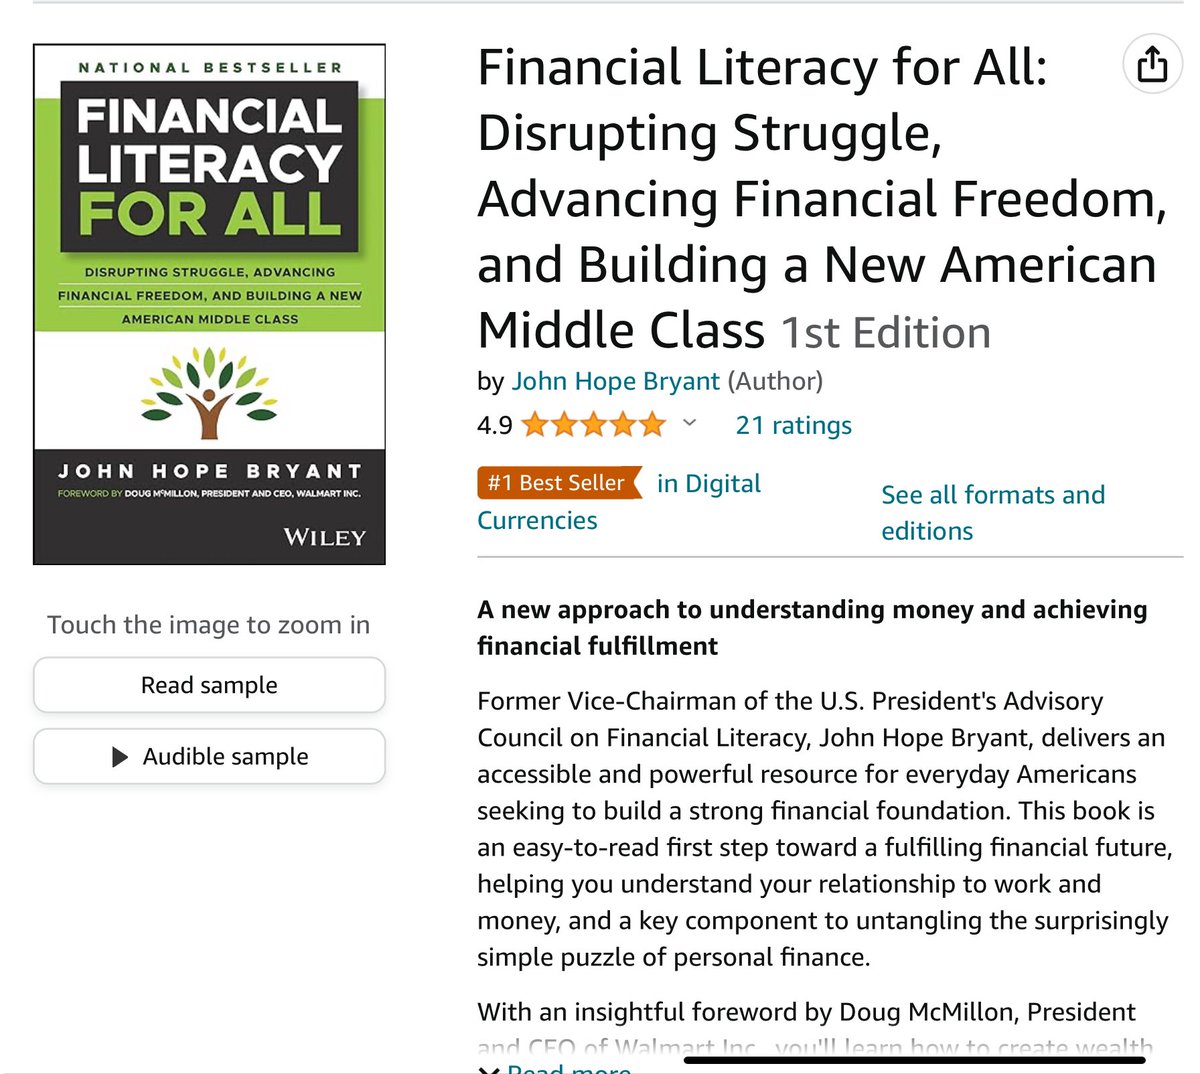 Thank you all, for helping to make my newest book a national #1 bestseller on Amazon in economics, business management, budgeting and digital currencies, on Kindle, Audible and in hard copy. 👇🏽 If you haven’t gotten your copy yet, get it now!